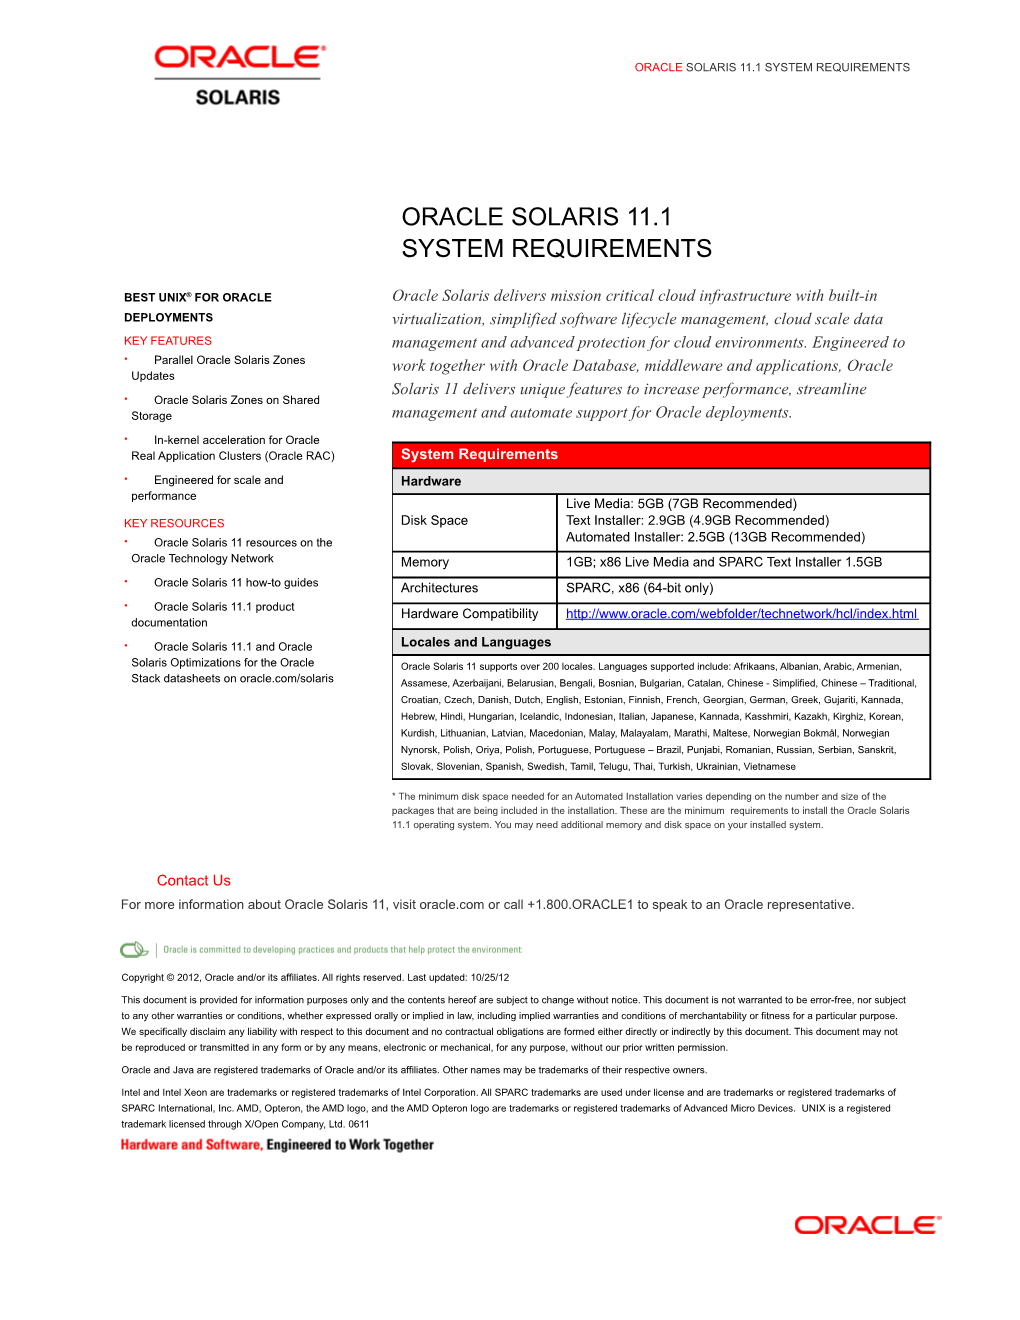 Oracle Solaris 11.1 System Requirements